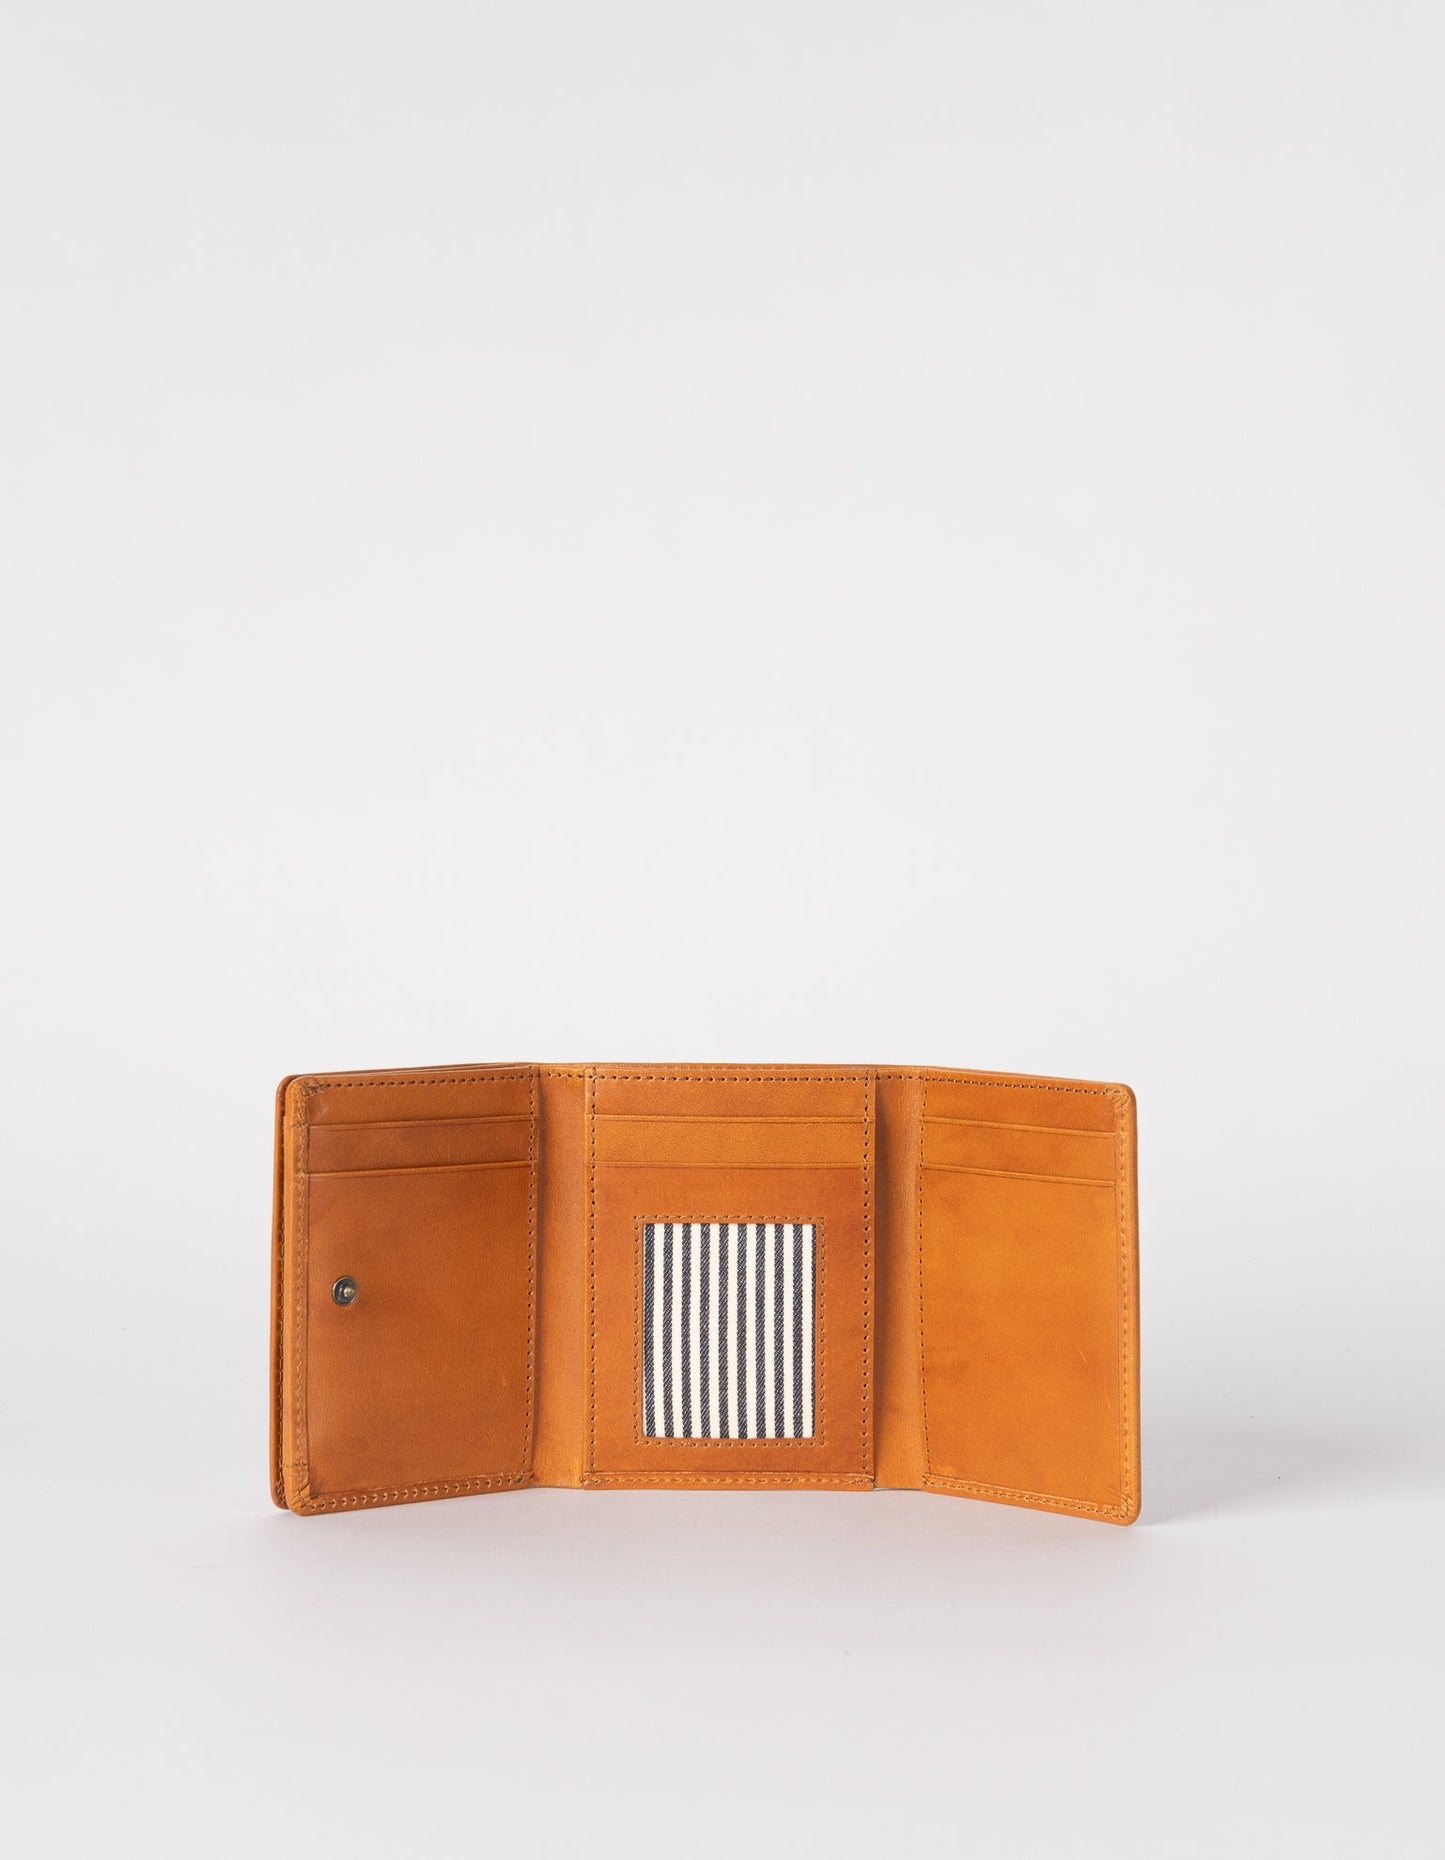 Introducing Ollie, the bill-fold eco-leather wallet that's here to prove that big things do come in small packages – or pockets! Ethically made in India.